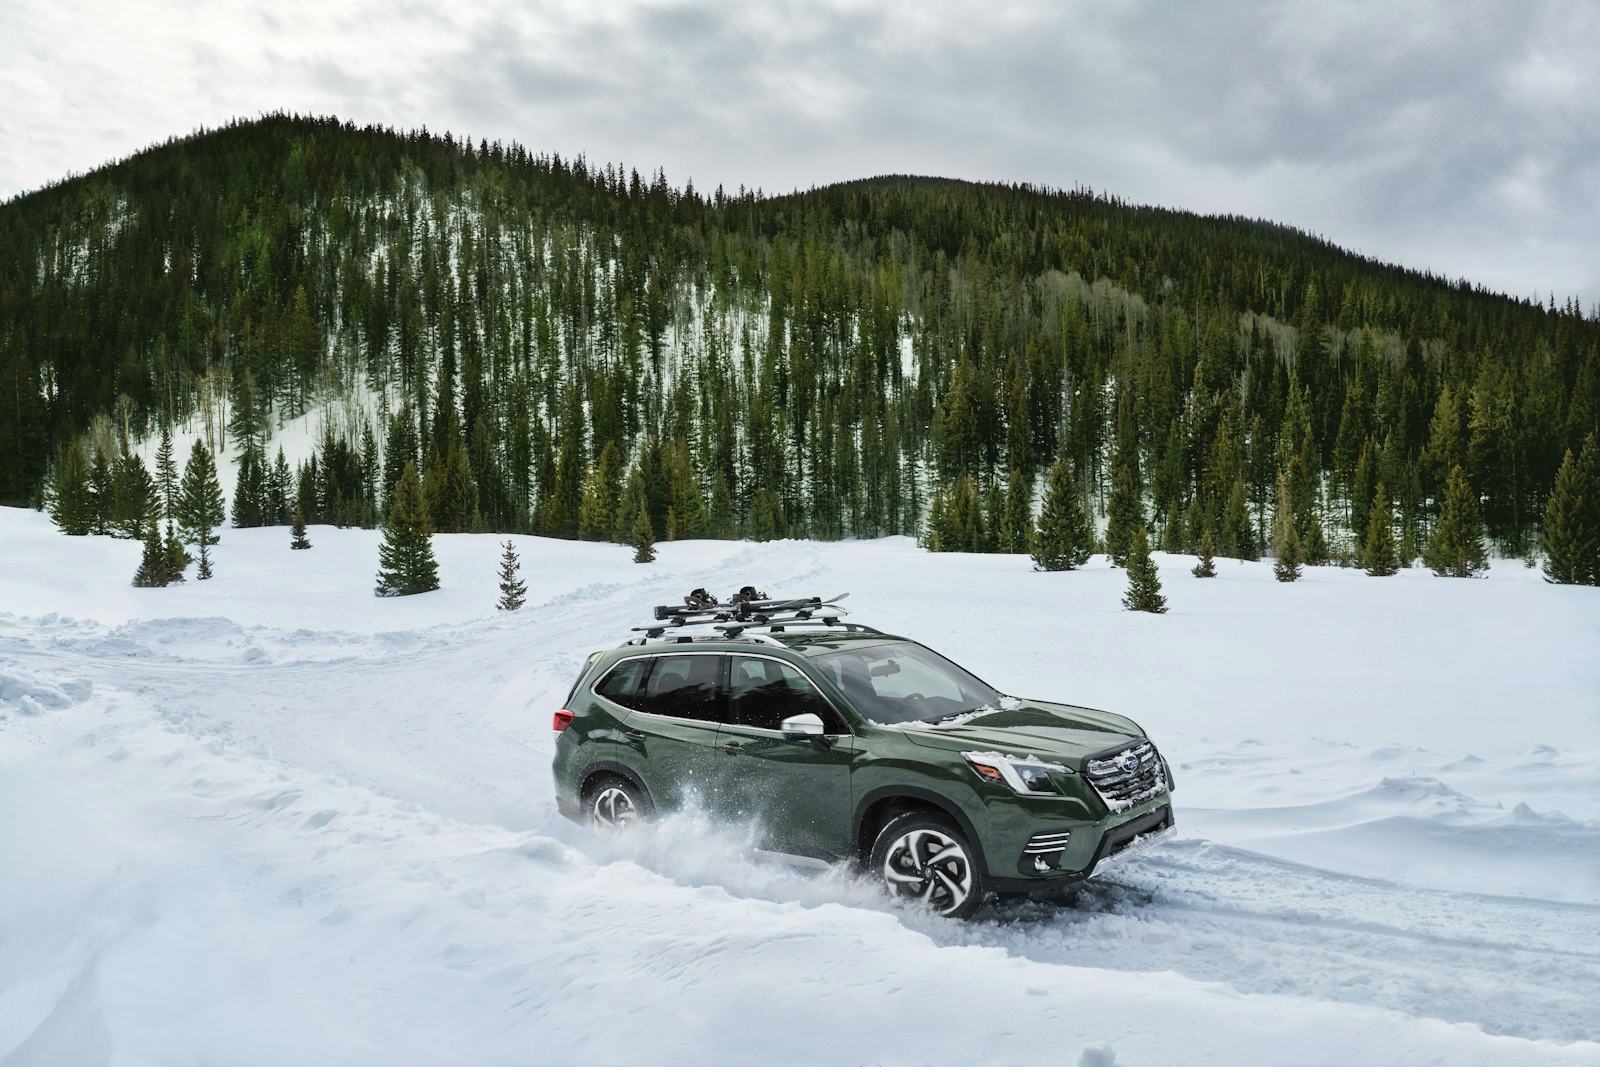 » The Best Vehicles for Snow & Winter Driving